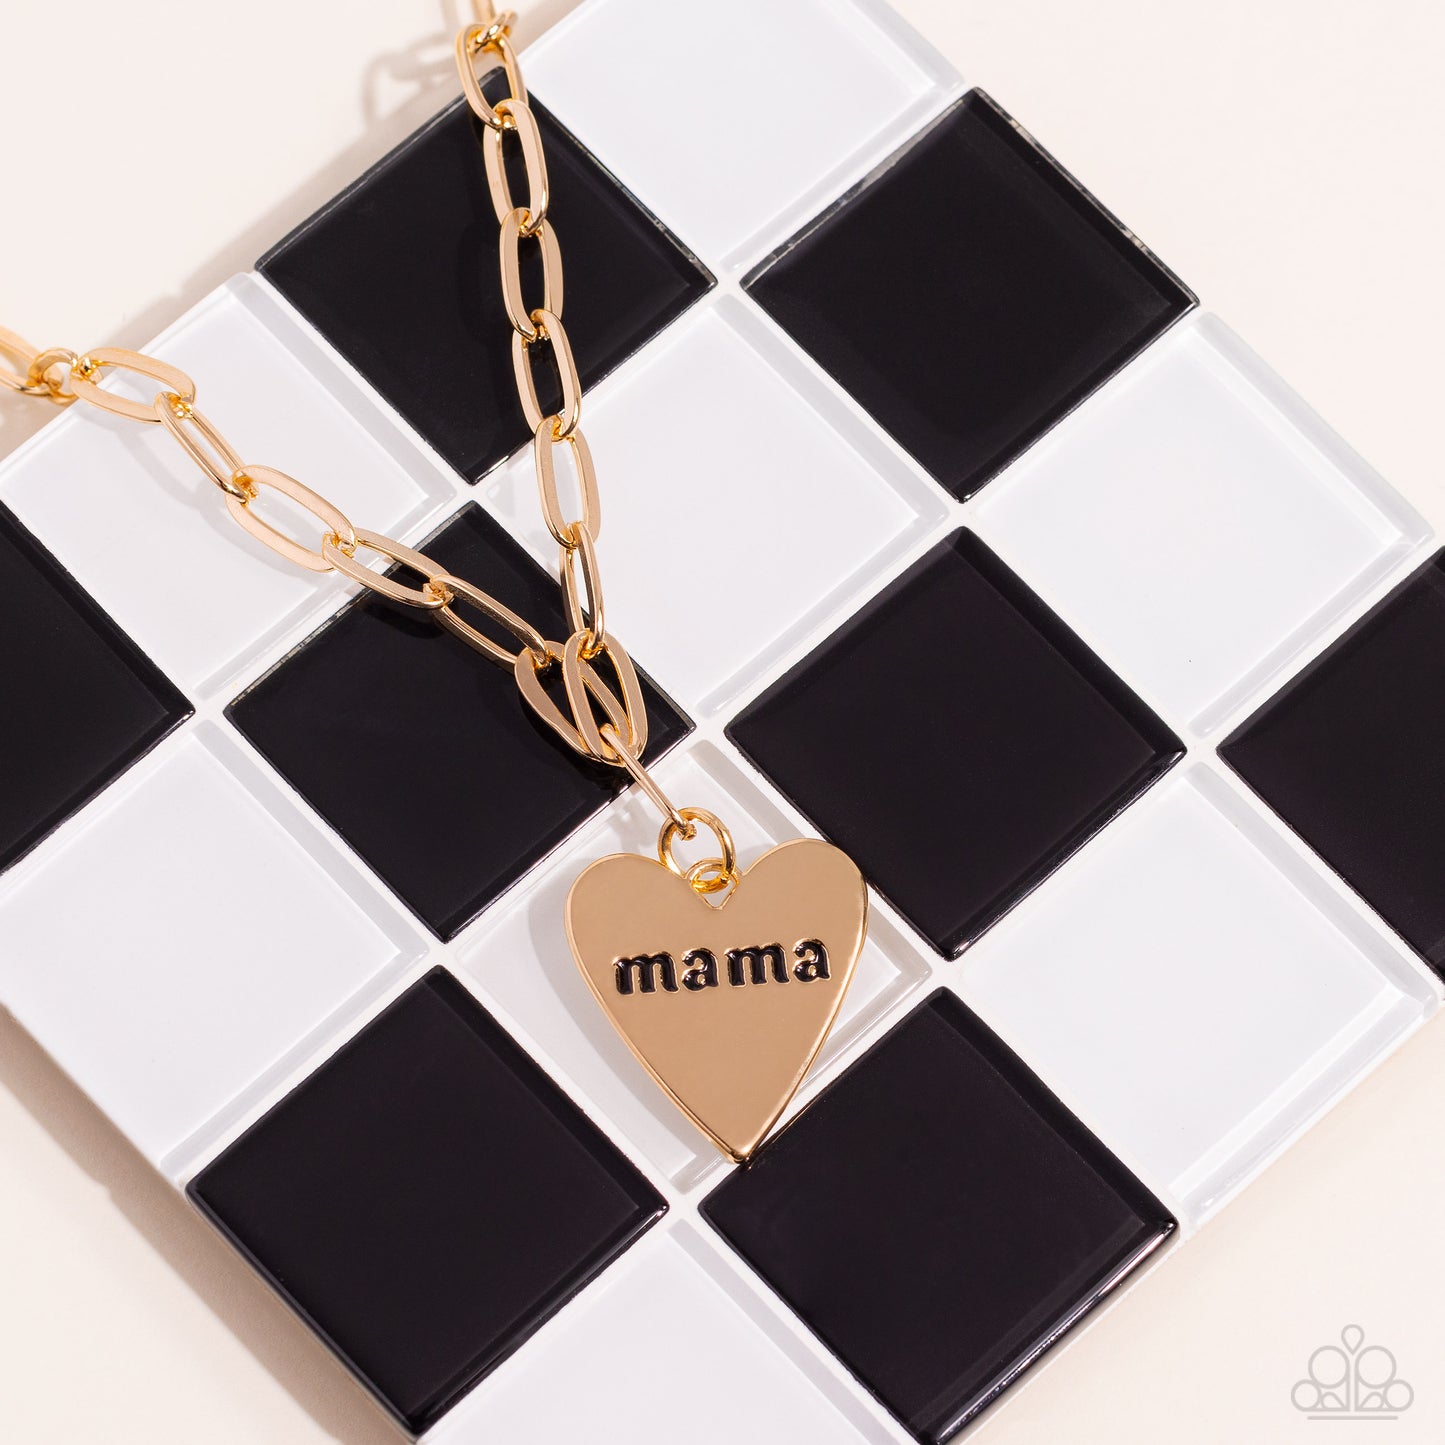 Mama Cant Buy You Love - Gold Paparazzi Necklace